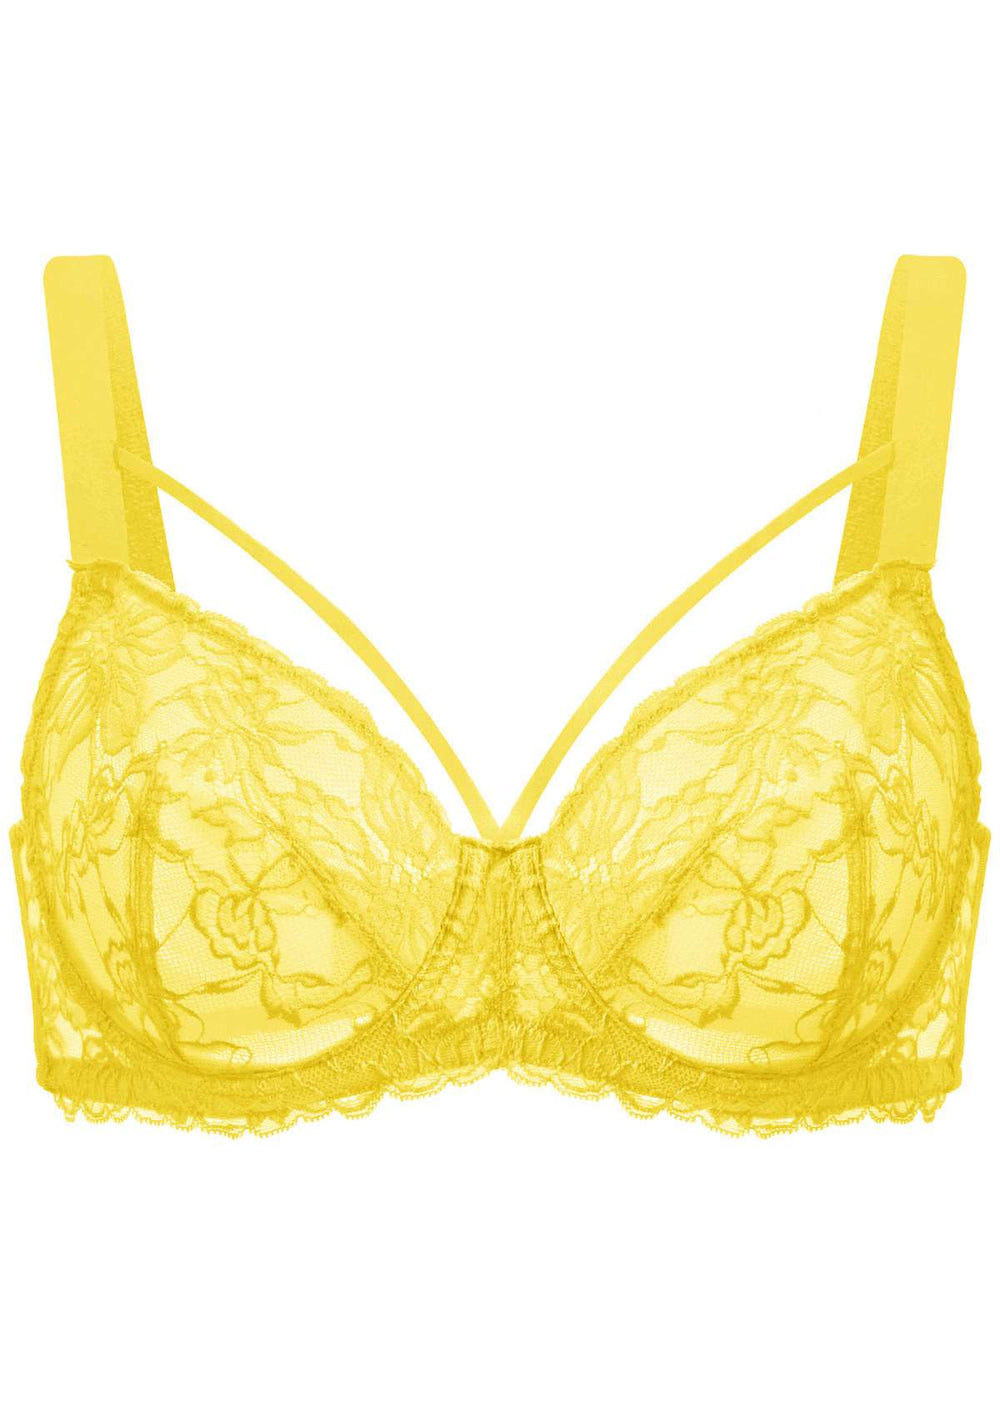 NWT Victorias Secret Demi Bra Demi Buste Unlined Wired Mesh Floral Lace  Yellow